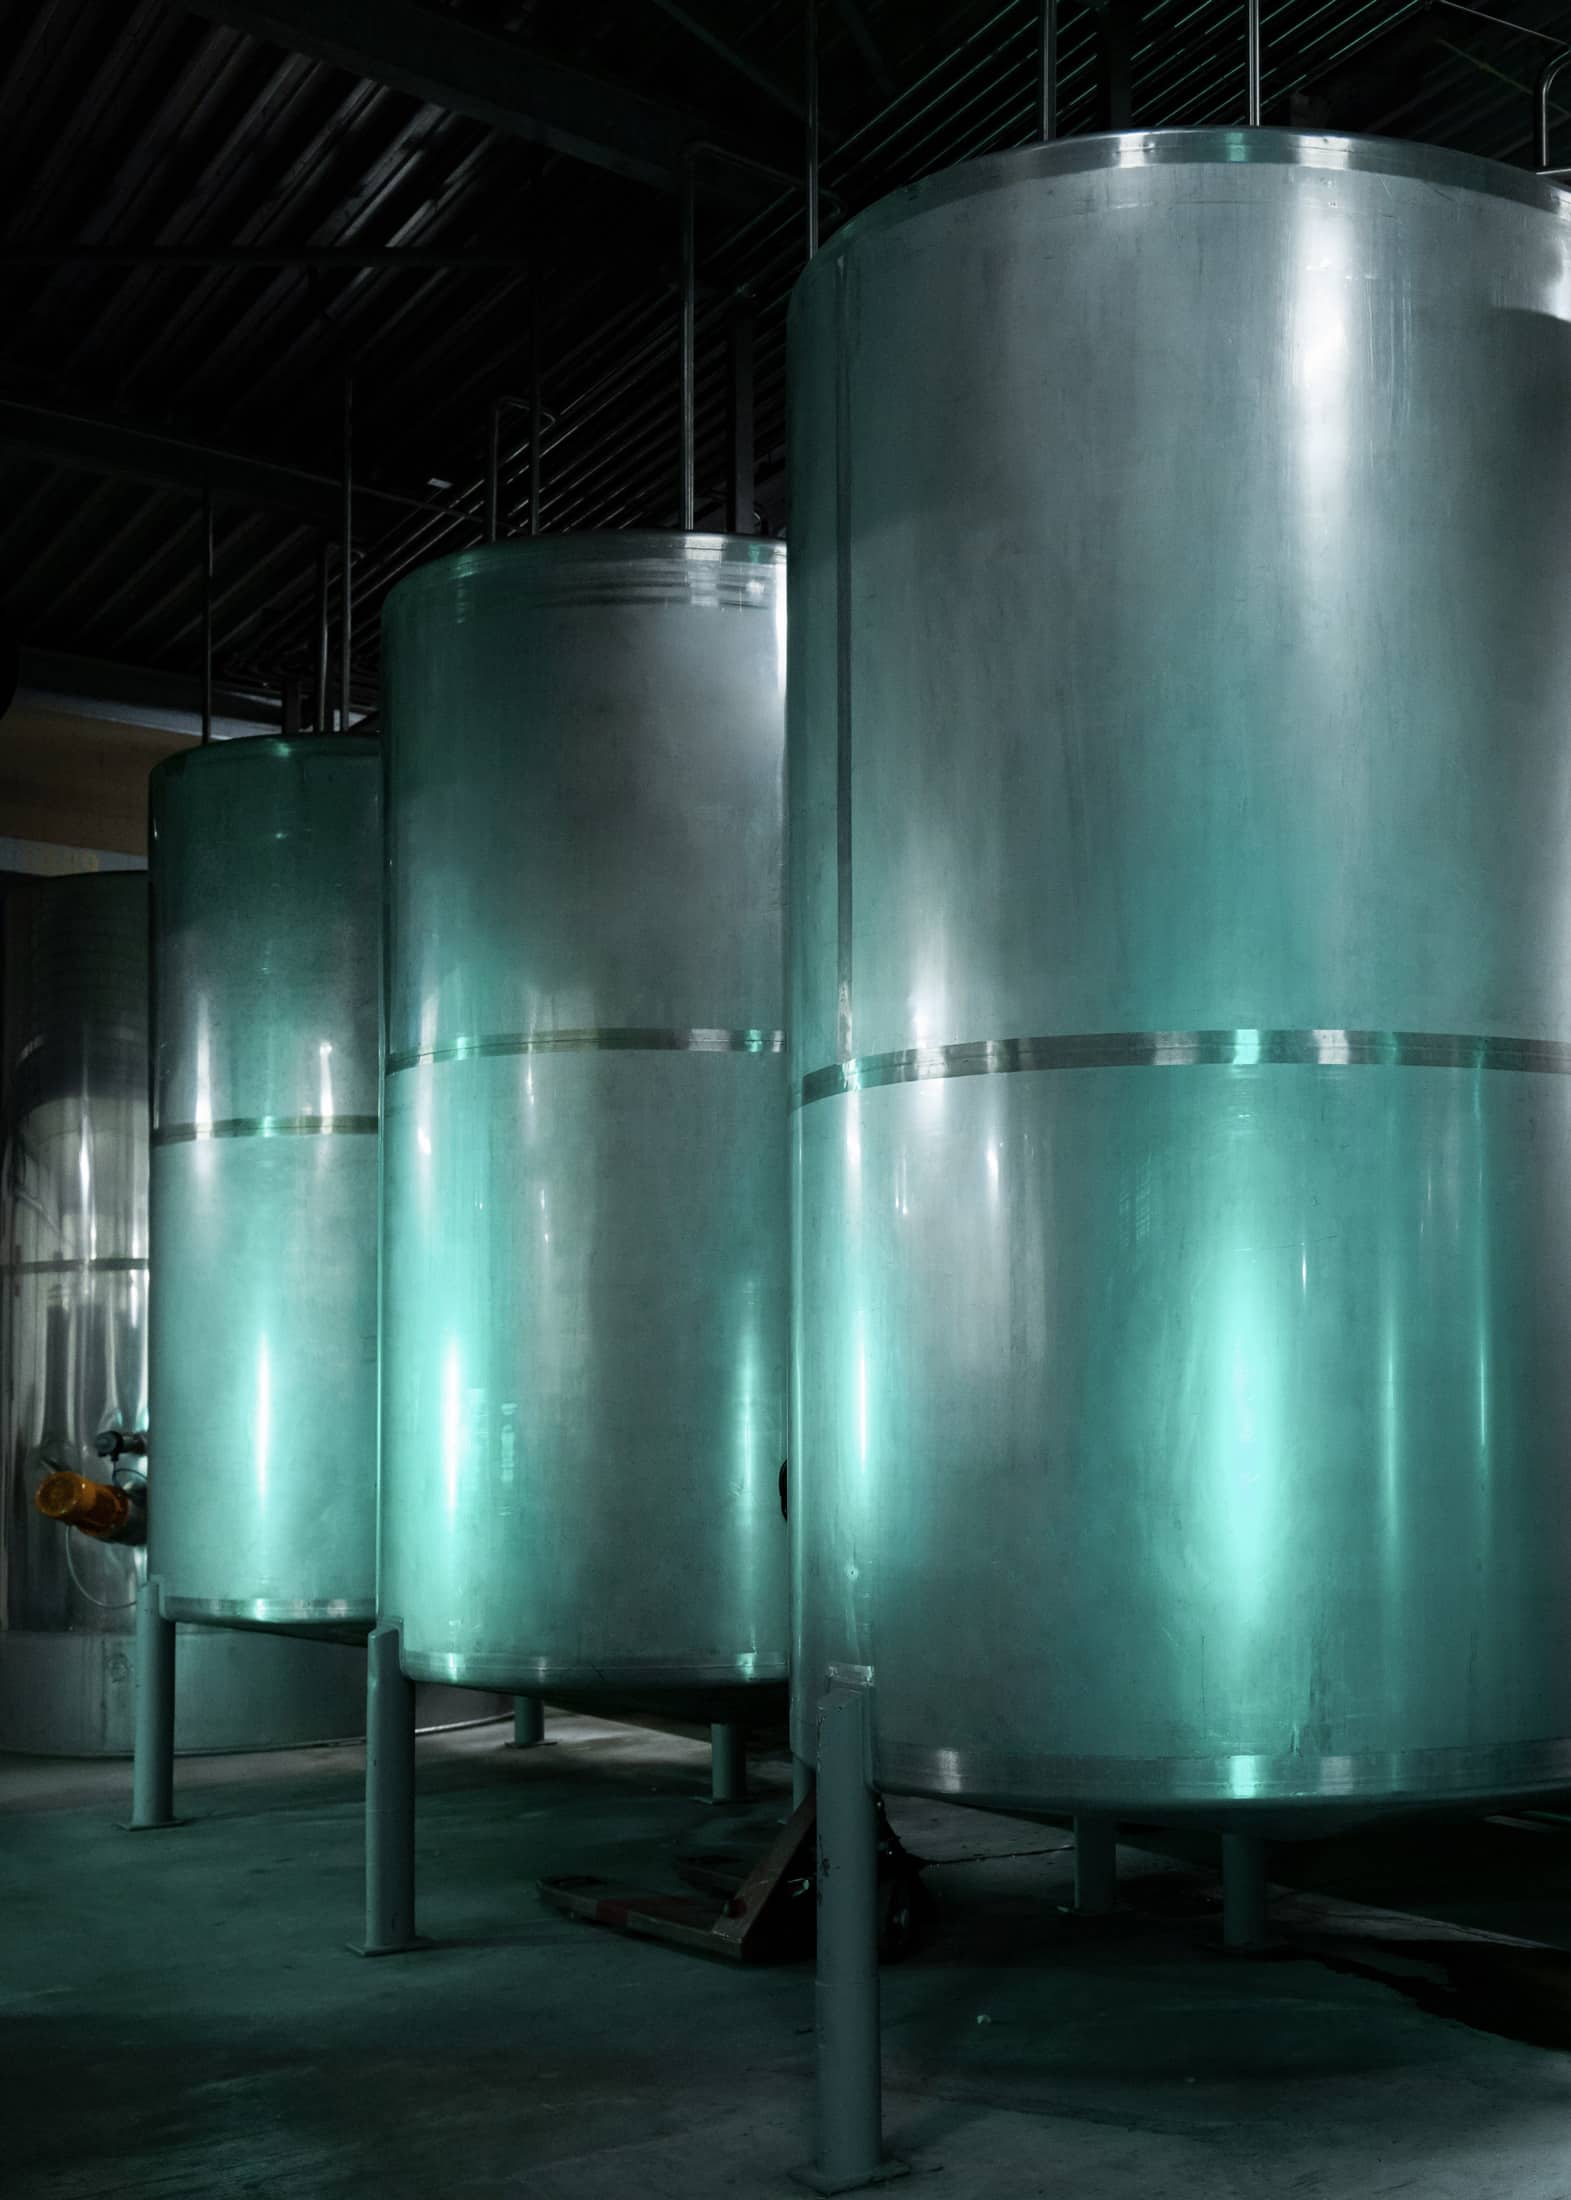 Storing the vodka in silos is a important step to purify vodka.